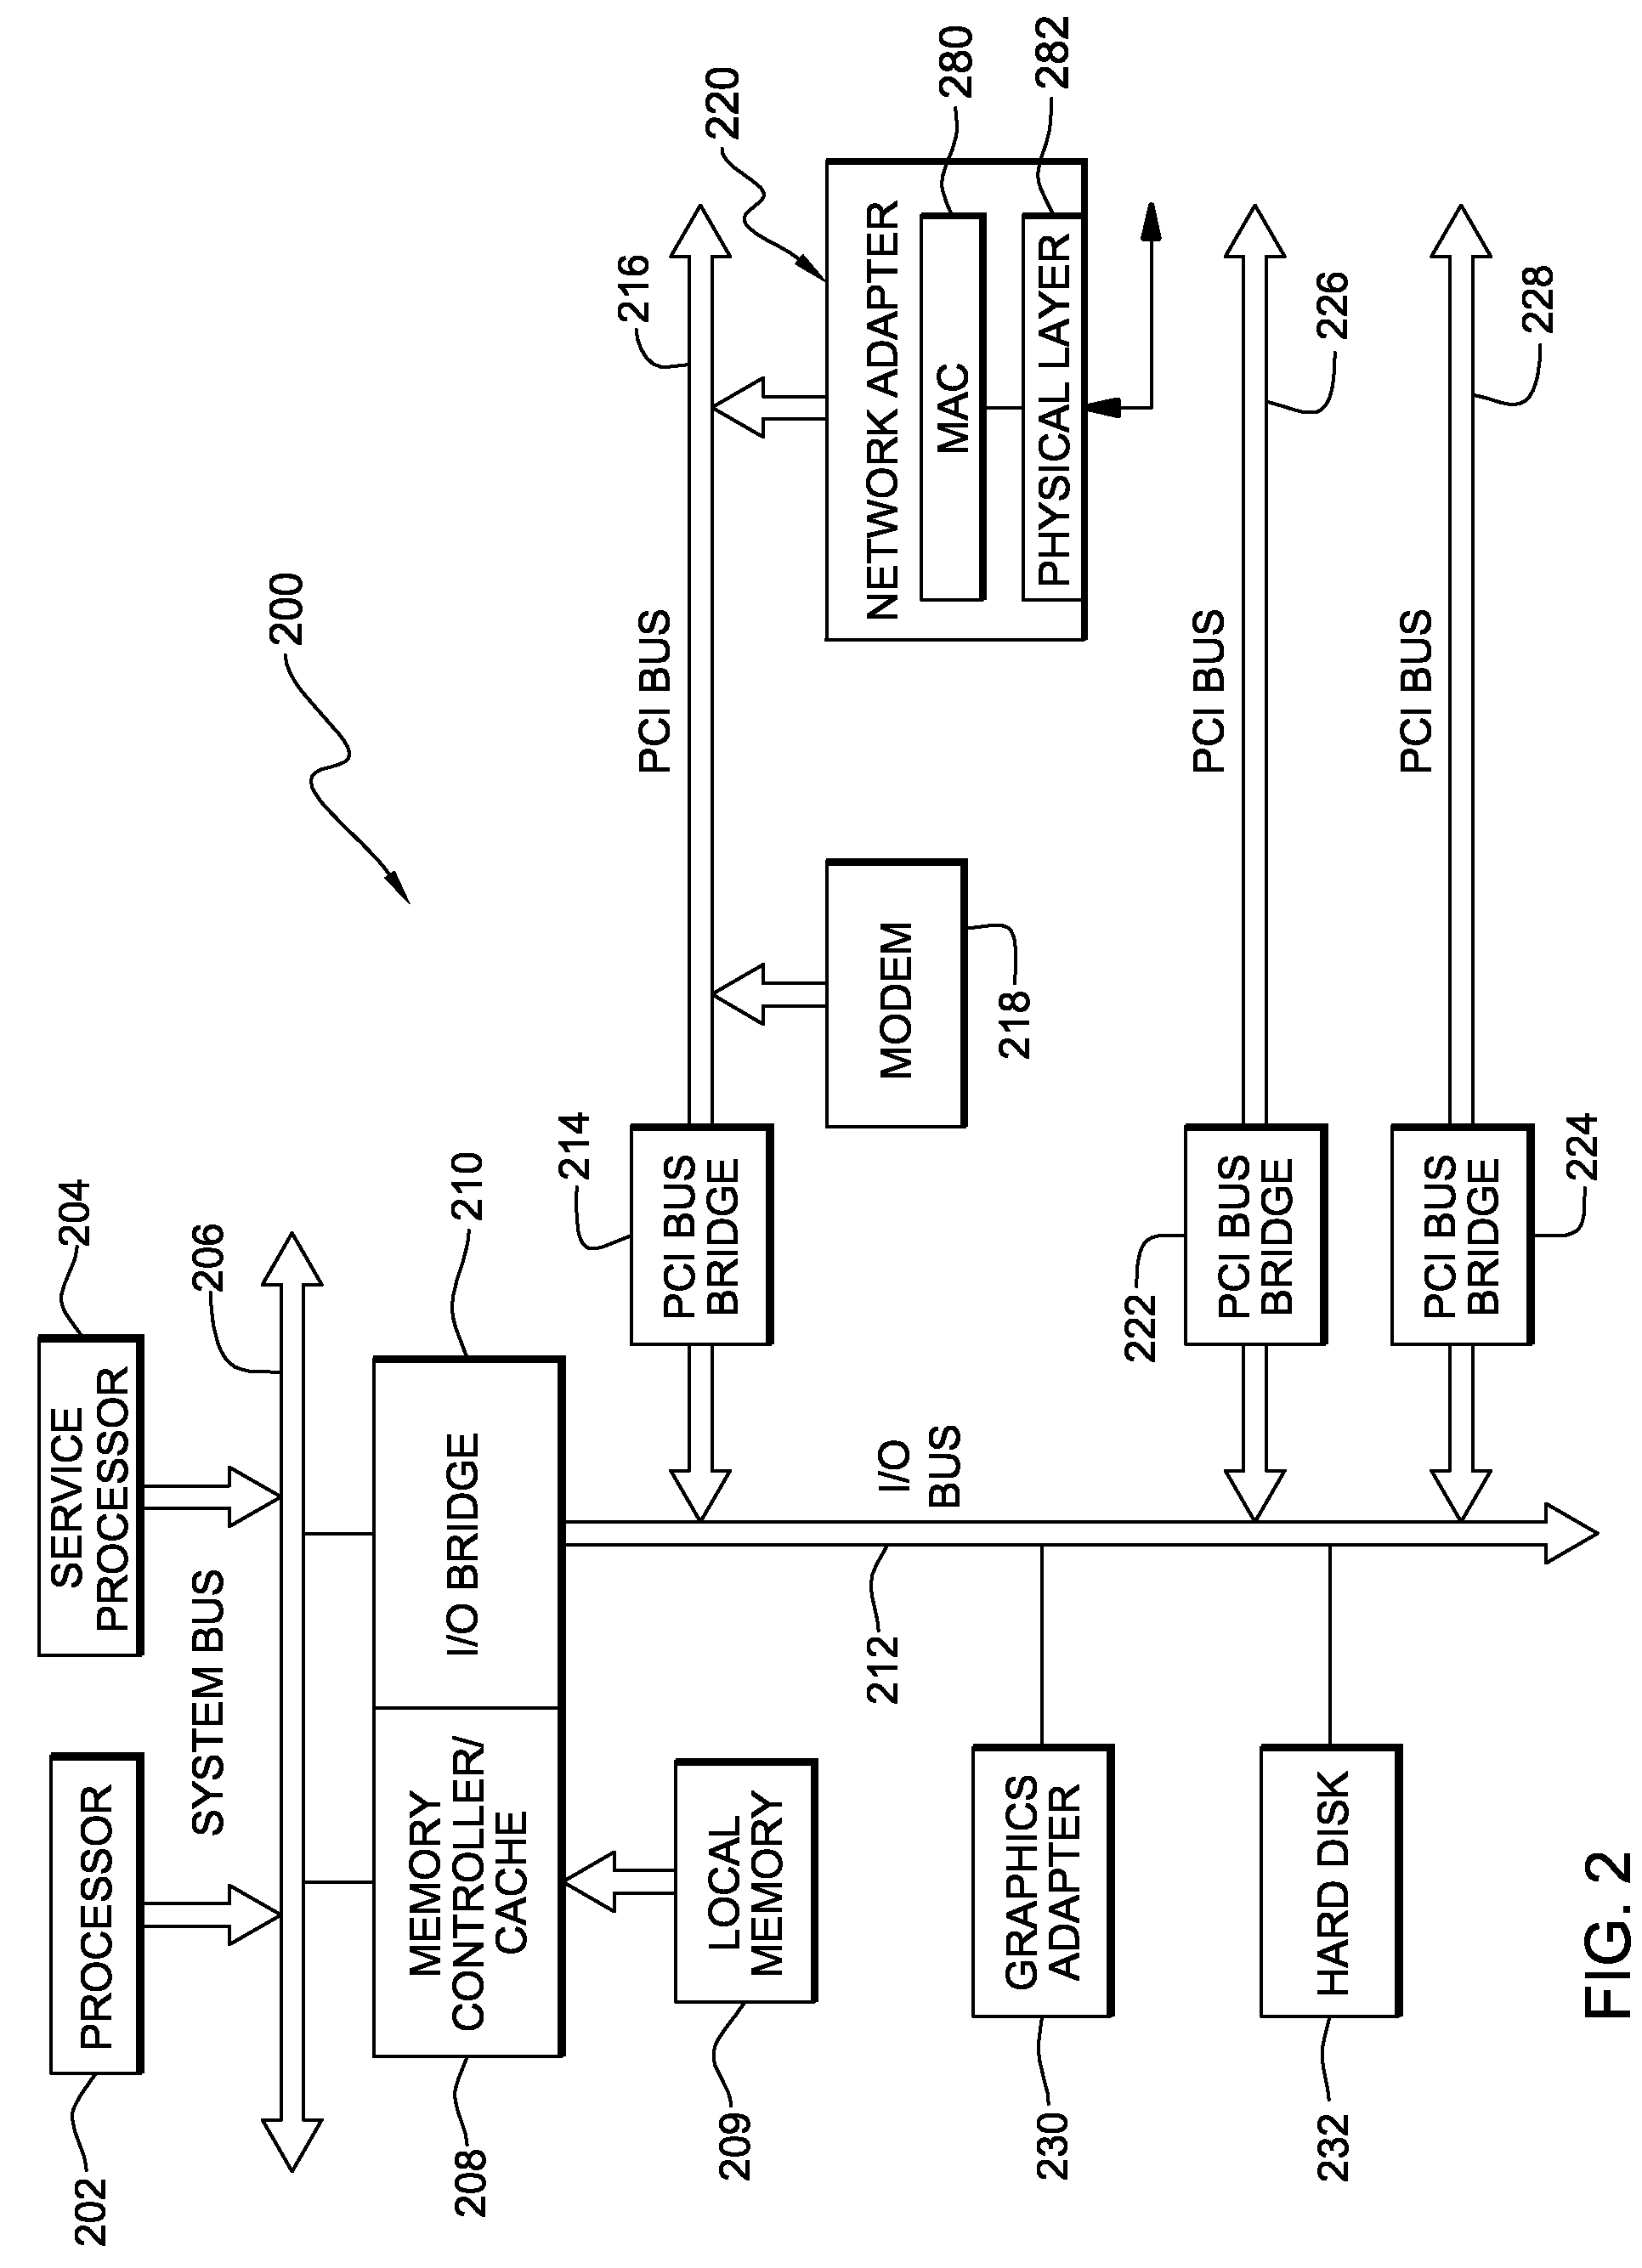 Transparent Hypervisor Pinning of Critical Memory Areas in a Shared Memory Partition Data Processing System